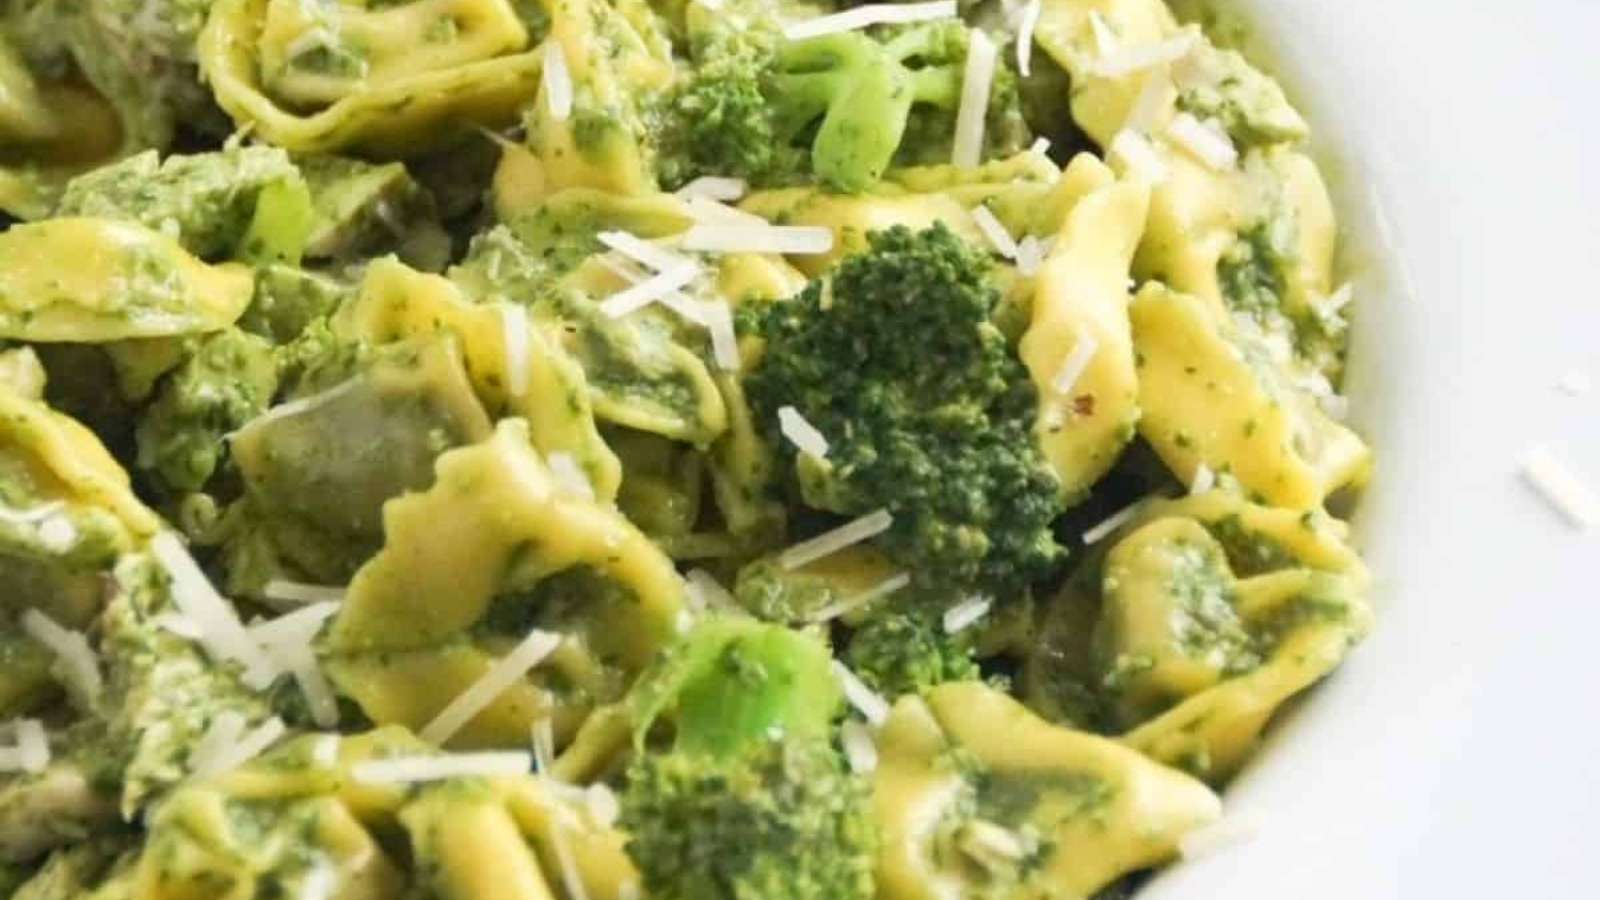 A bowl of pasta with broccoli and pesto.